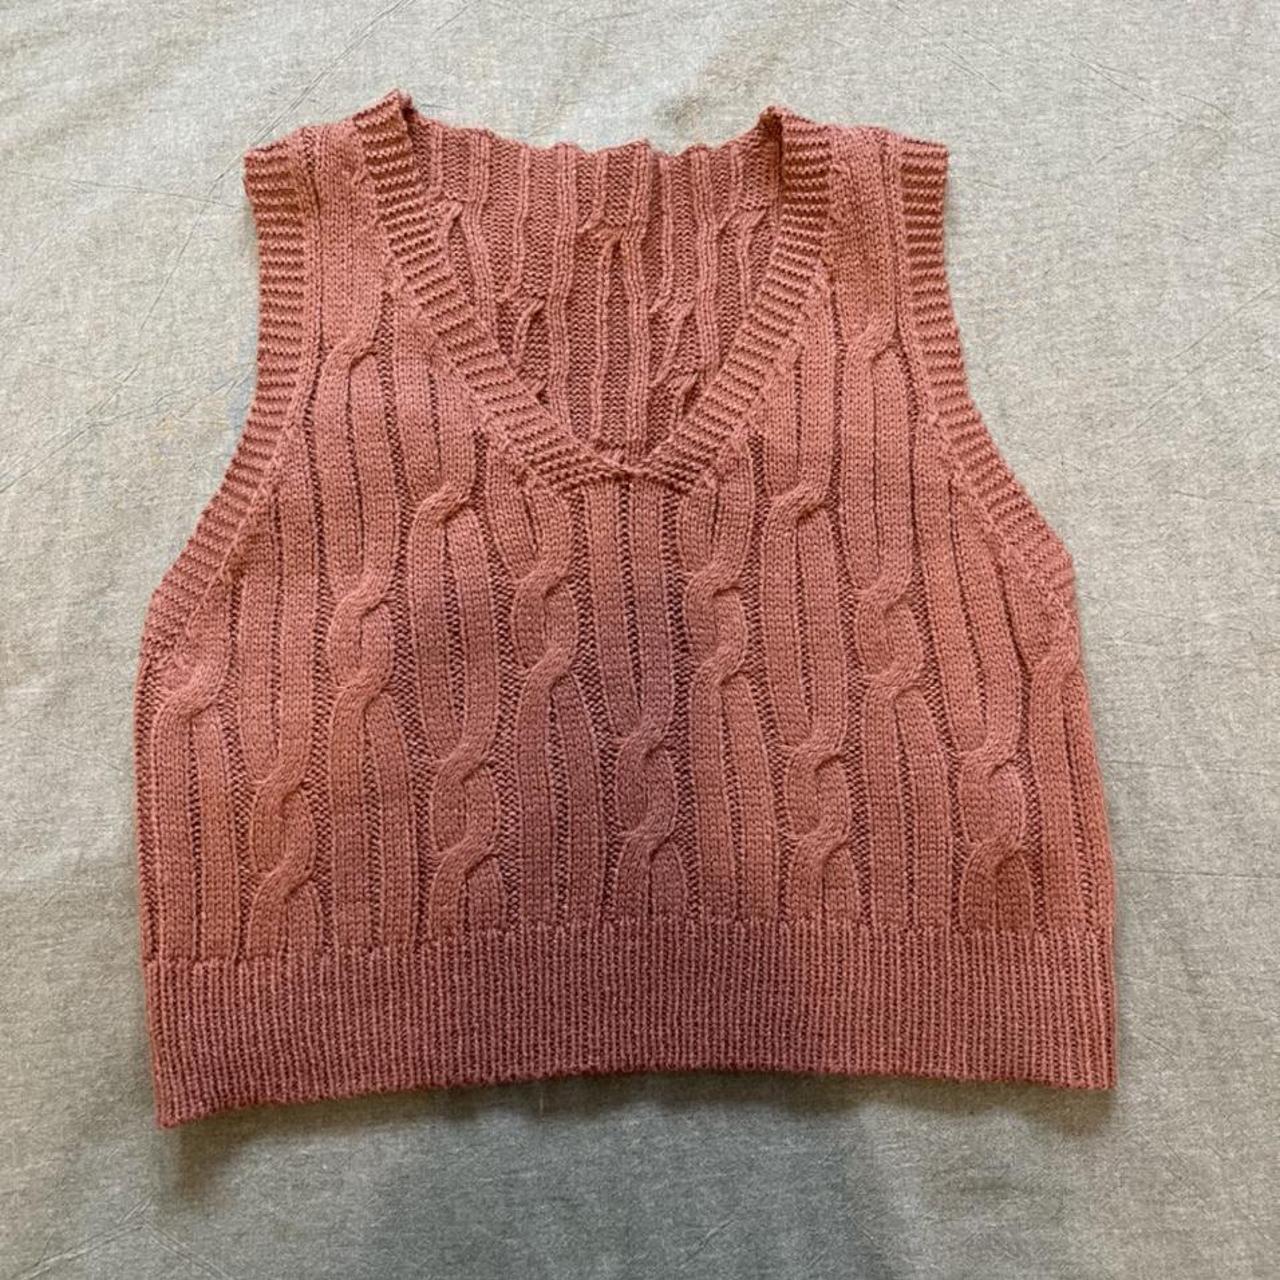 Product Image 2 - Cable knit sweater vest
Size S
Color